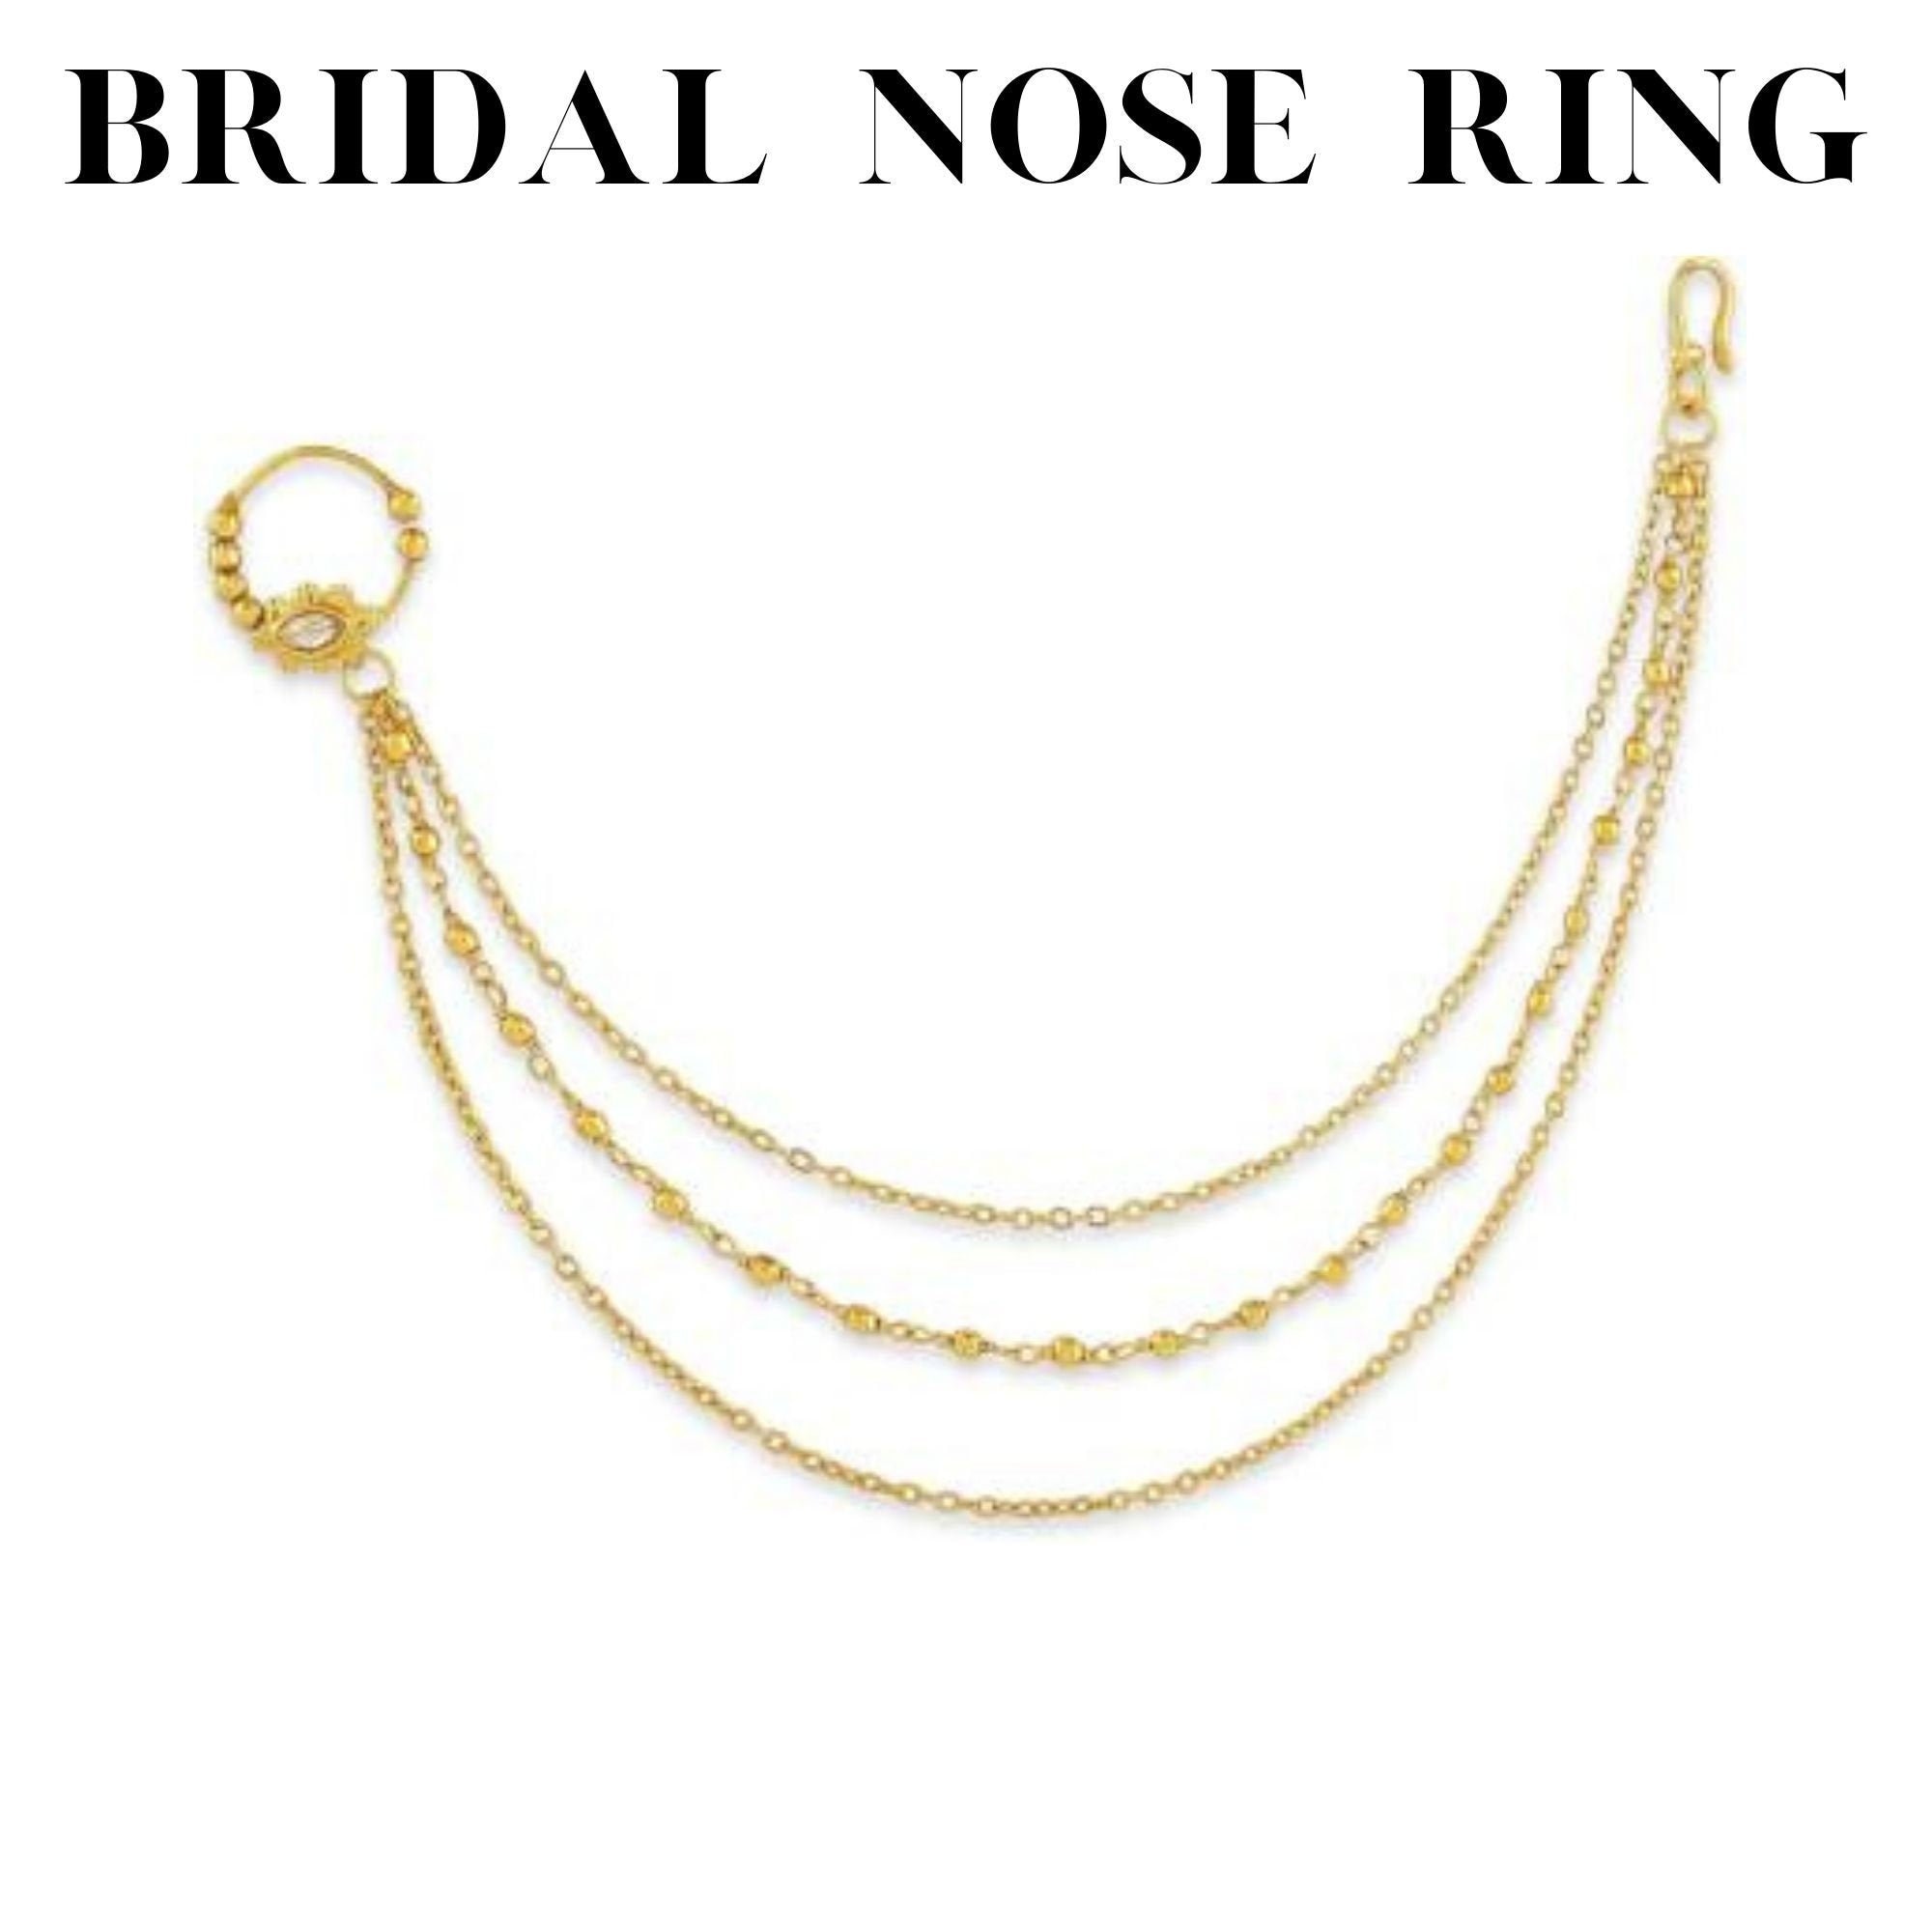 Buy Indian Nose Ring Nath, Studs, Hoops Gold Plated Sabyasachi Adaa Jewels  Pakistani Designer Bridal Jewelry Handmade Personalised Jewels Big Online  in India - Etsy